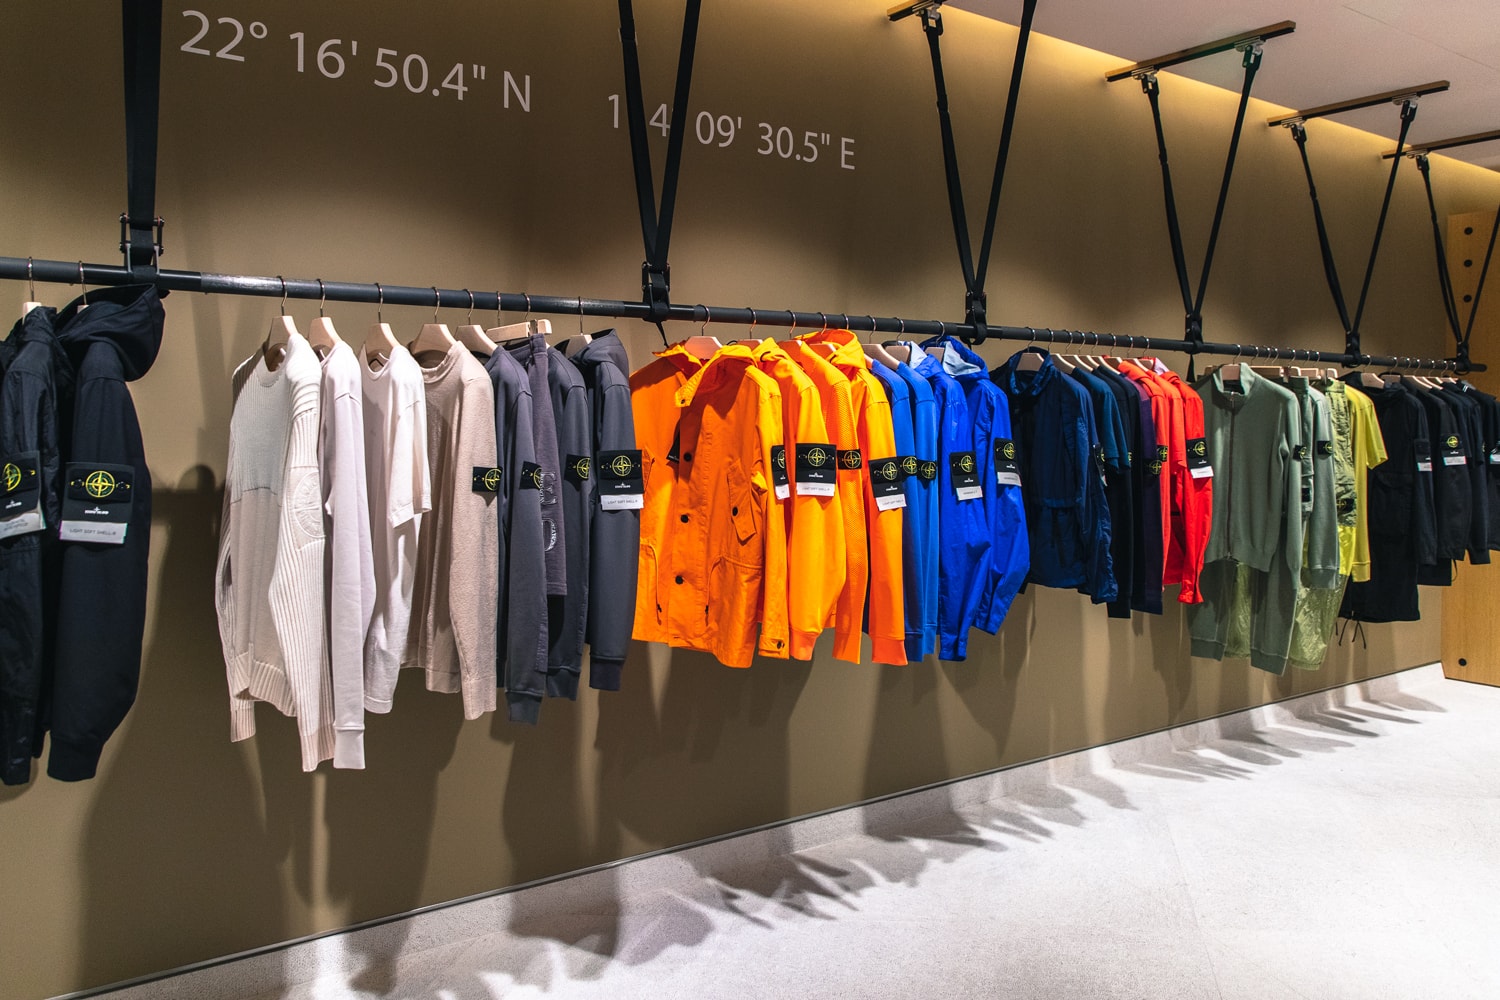 Carlo Rivetti Stone Island Full Interview hong kong store opening asia expansion italian italy brand fashion industrial design high end performance innovation design research materials garments drake supreme Massimo Osti rolex outdoors sandwich club street movement youth culture hong kong retail 